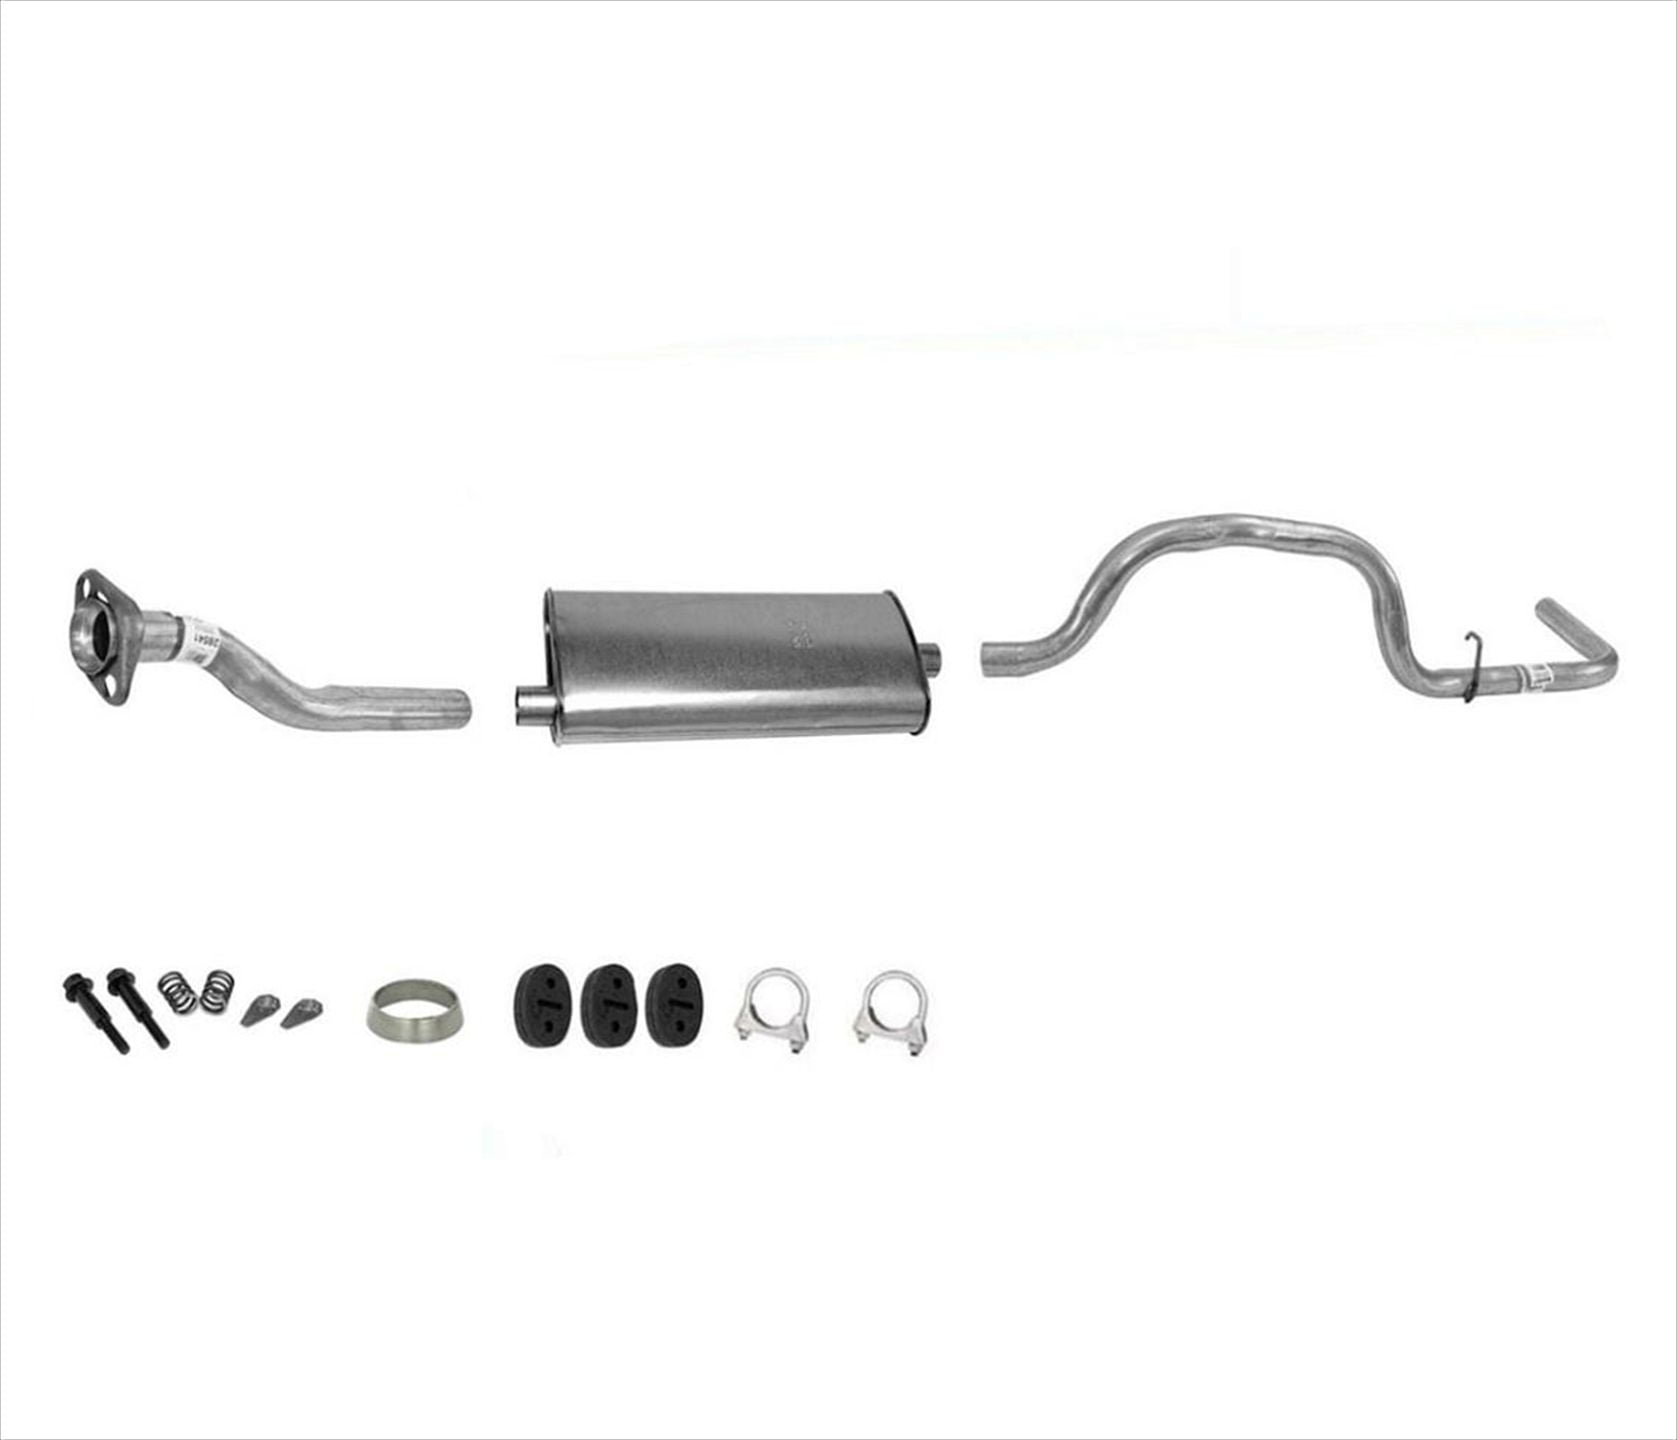 2004-2006 Toyota Camry 3.3L Japan built models only resonator muffler exhaust system kit fits 